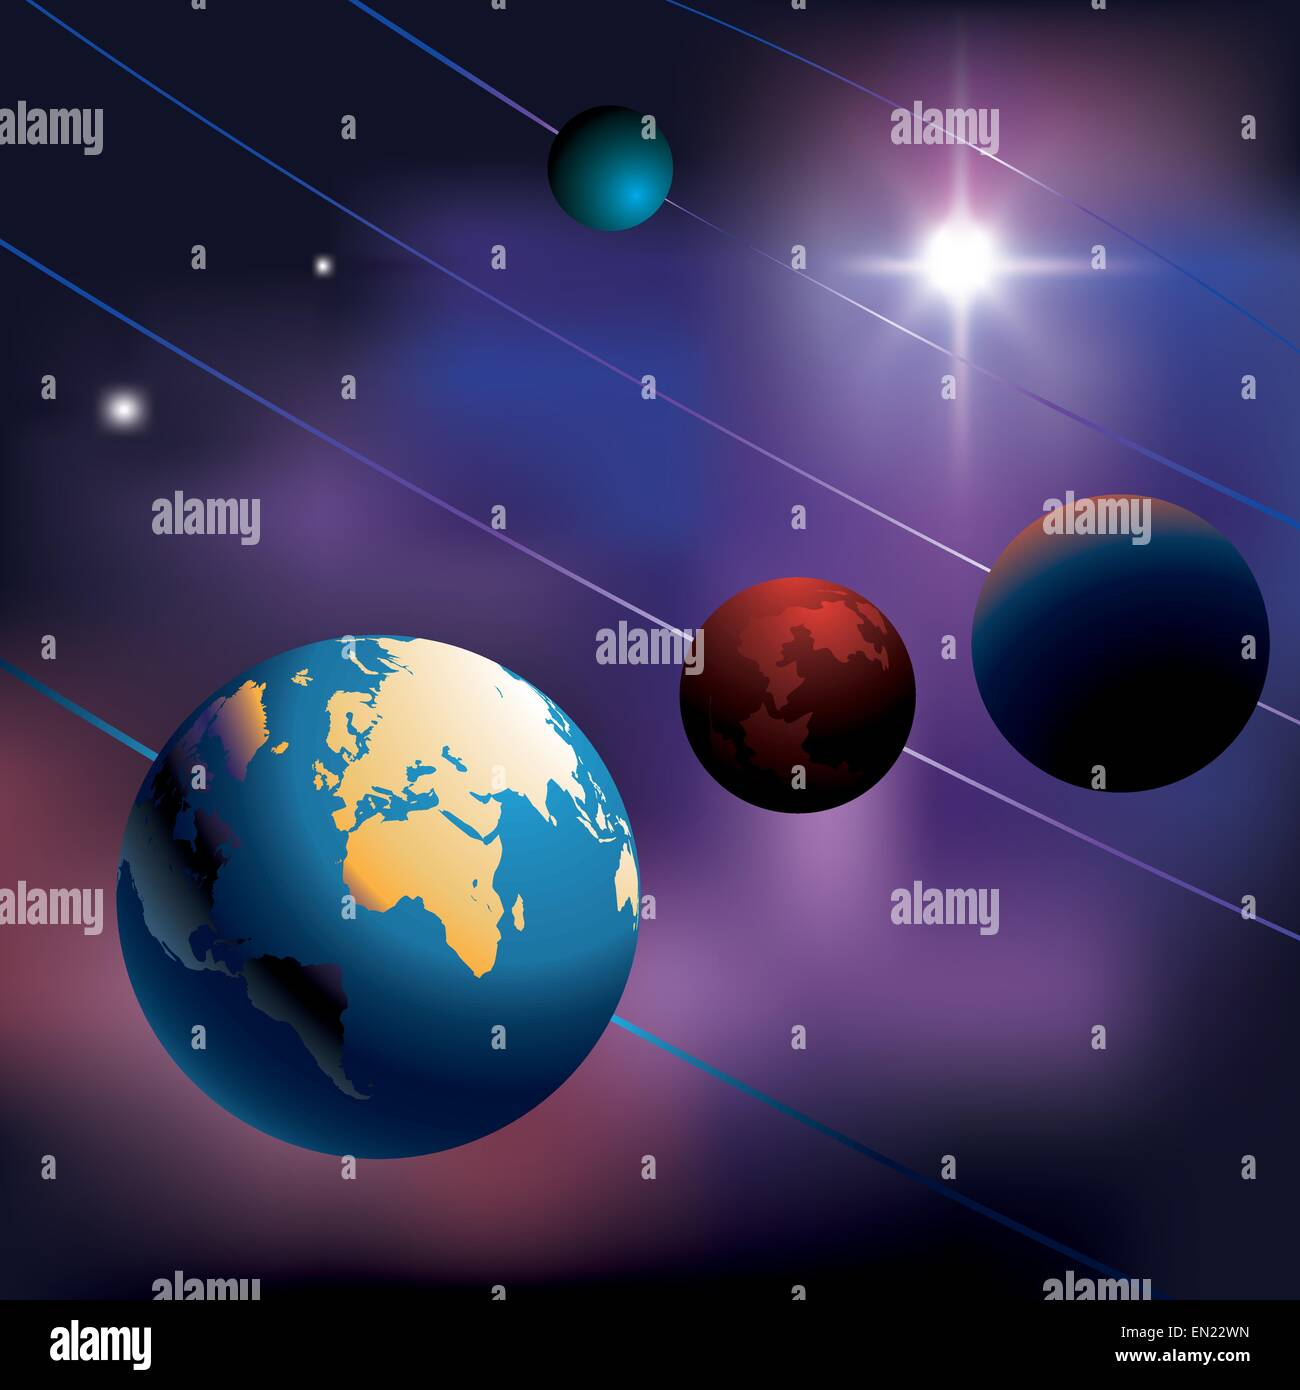 Night sky with planets. Vector illustration Stock Vector